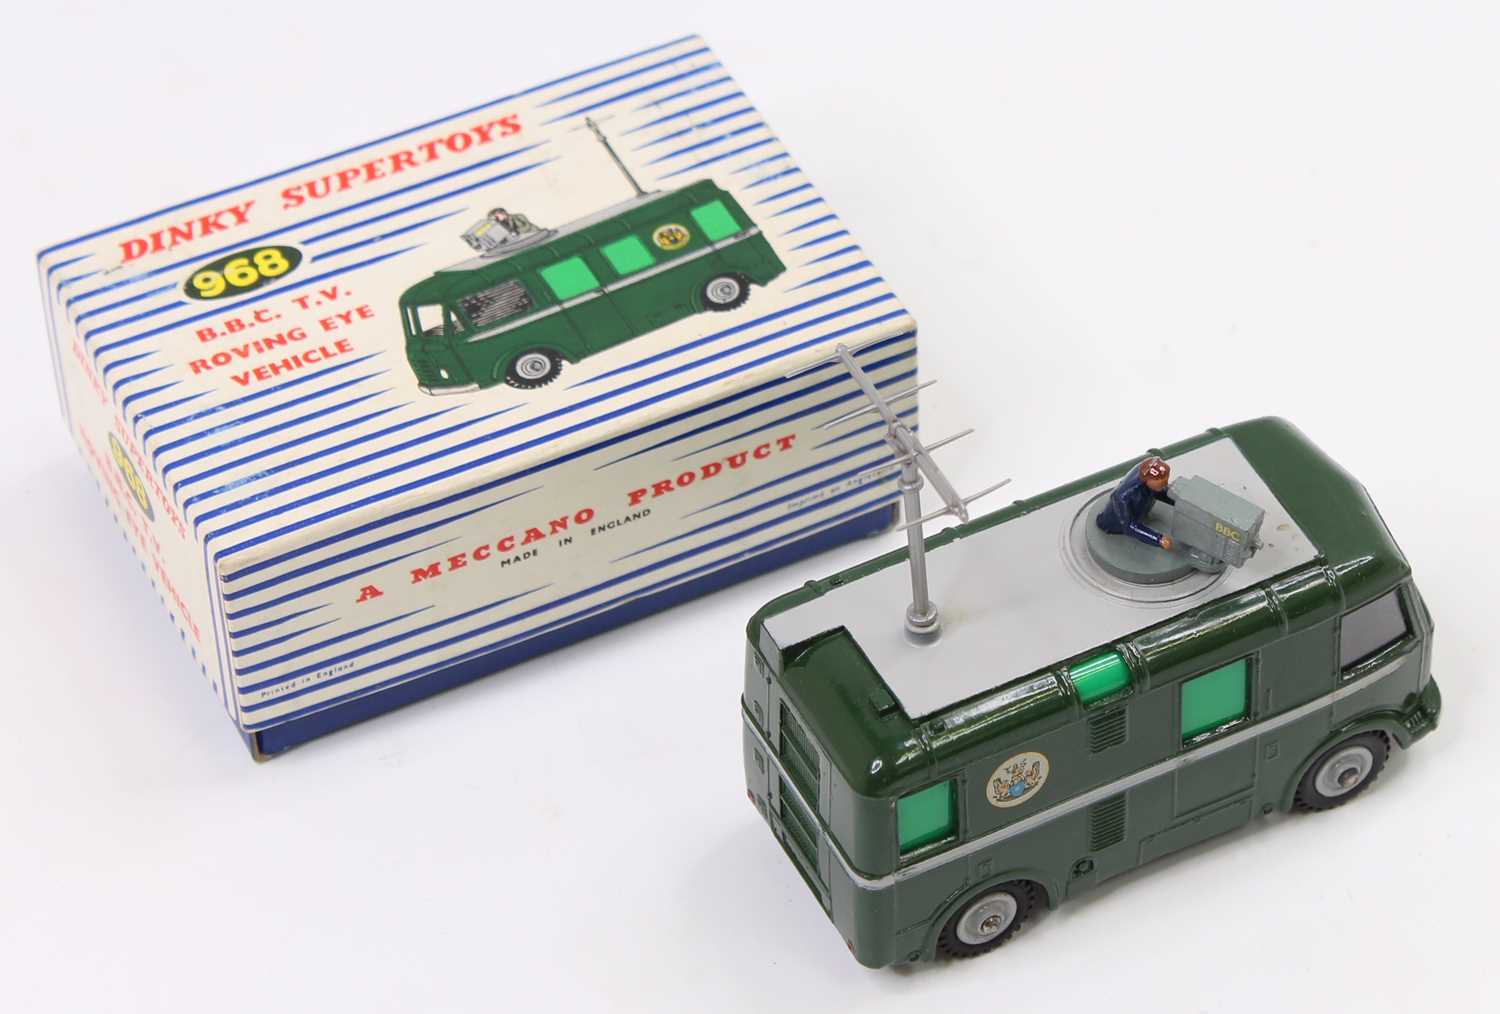 Dinky Toys No. 968 BBC TV roving eye vehicle with dark green body and grey detailing, with cameraman - Image 2 of 3